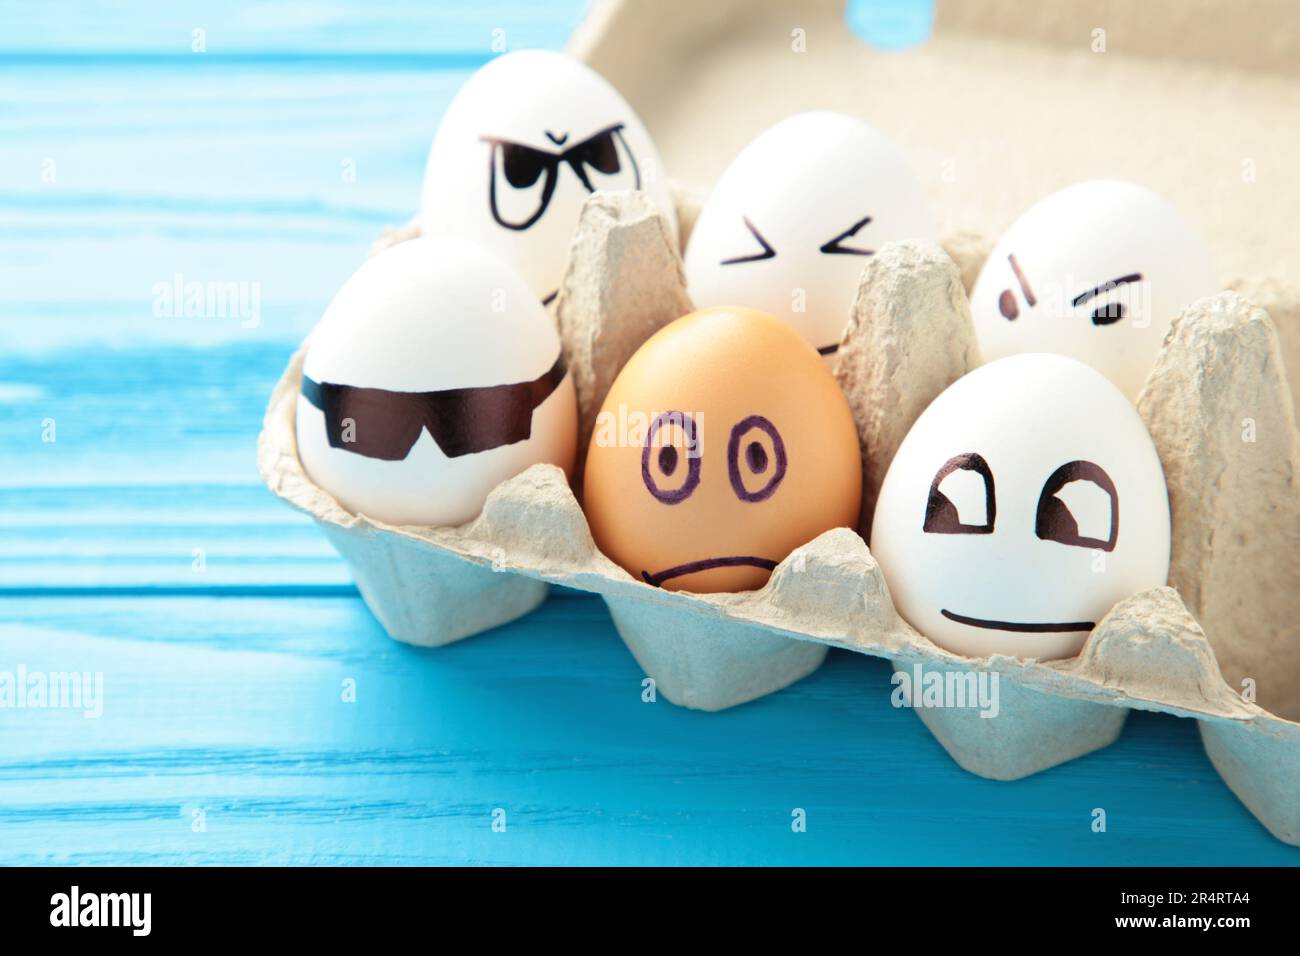 Eggs with different emotions on his face. Easter composition with copy space on blue background. Stop racism. Top view Stock Photo